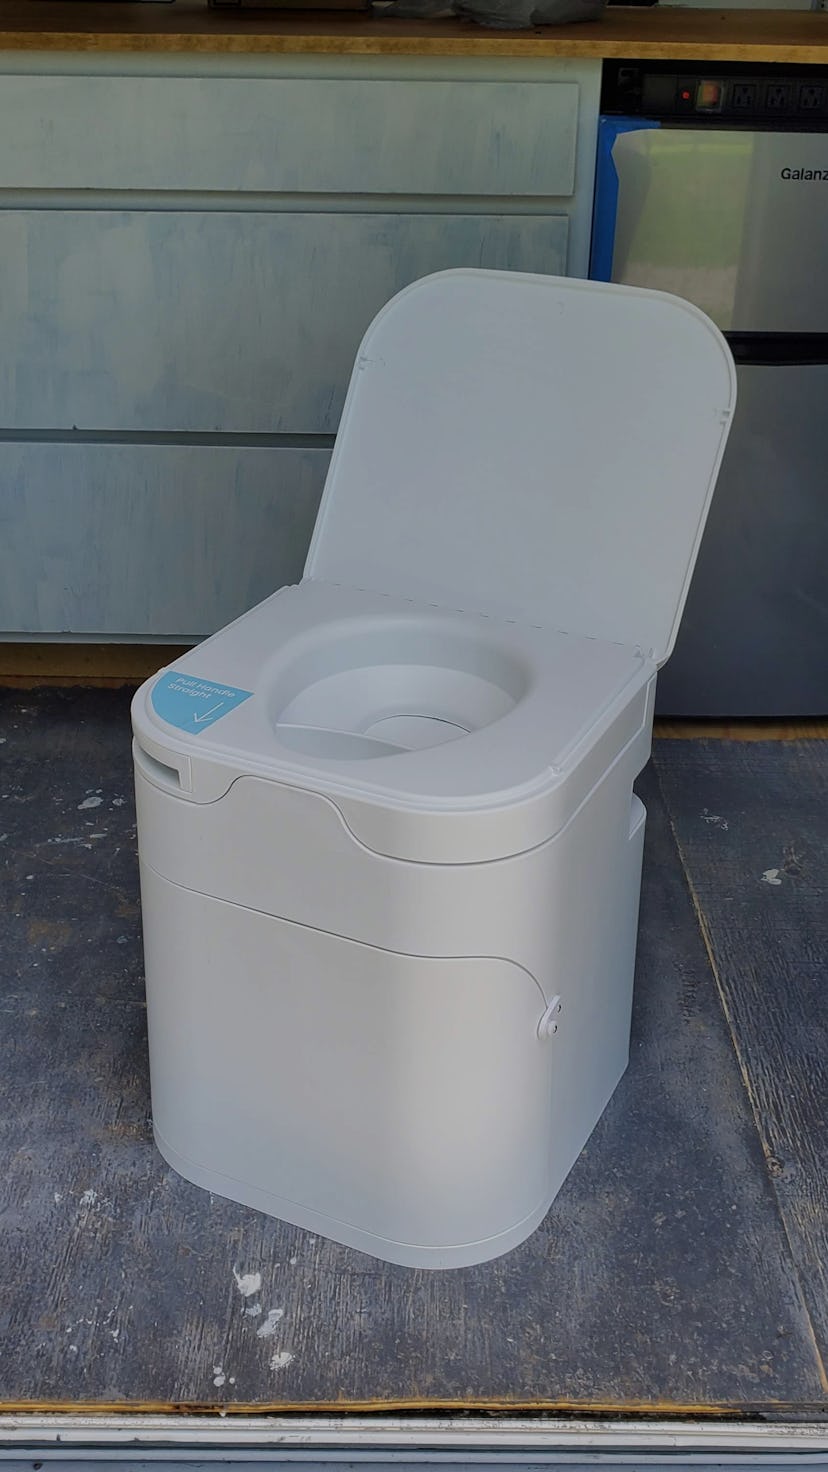 OGO Composting Toilet review: The best composting toilet for vanlife